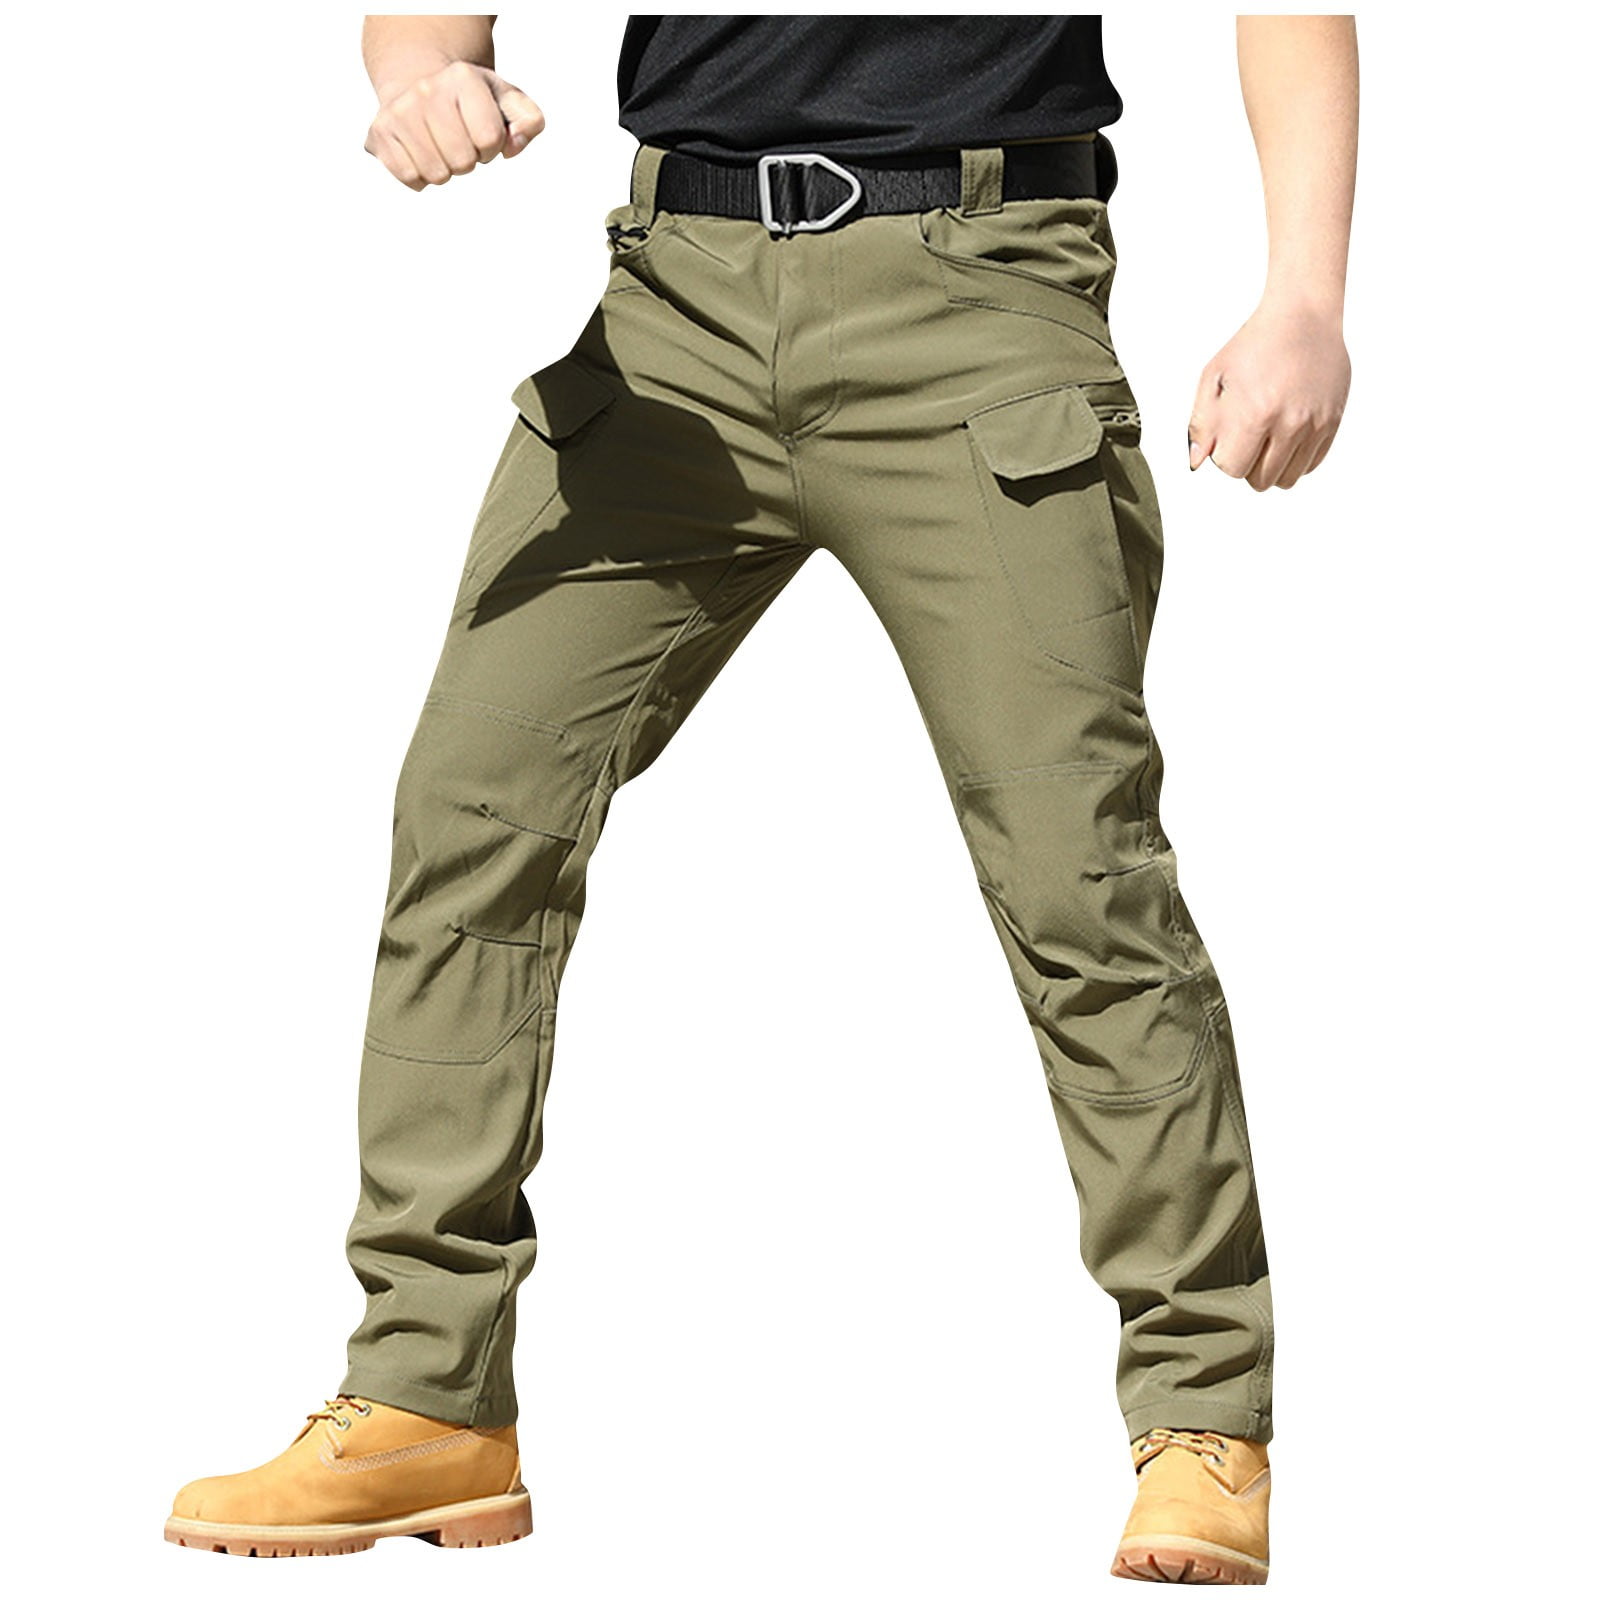  Brnmxoke Ripstop Pants for Men,Mans Wild Pants Long Trackpants  Casual Hiking Outdoor Lounge Pants,Hunting Pants for Men Army Green :  Sports & Outdoors